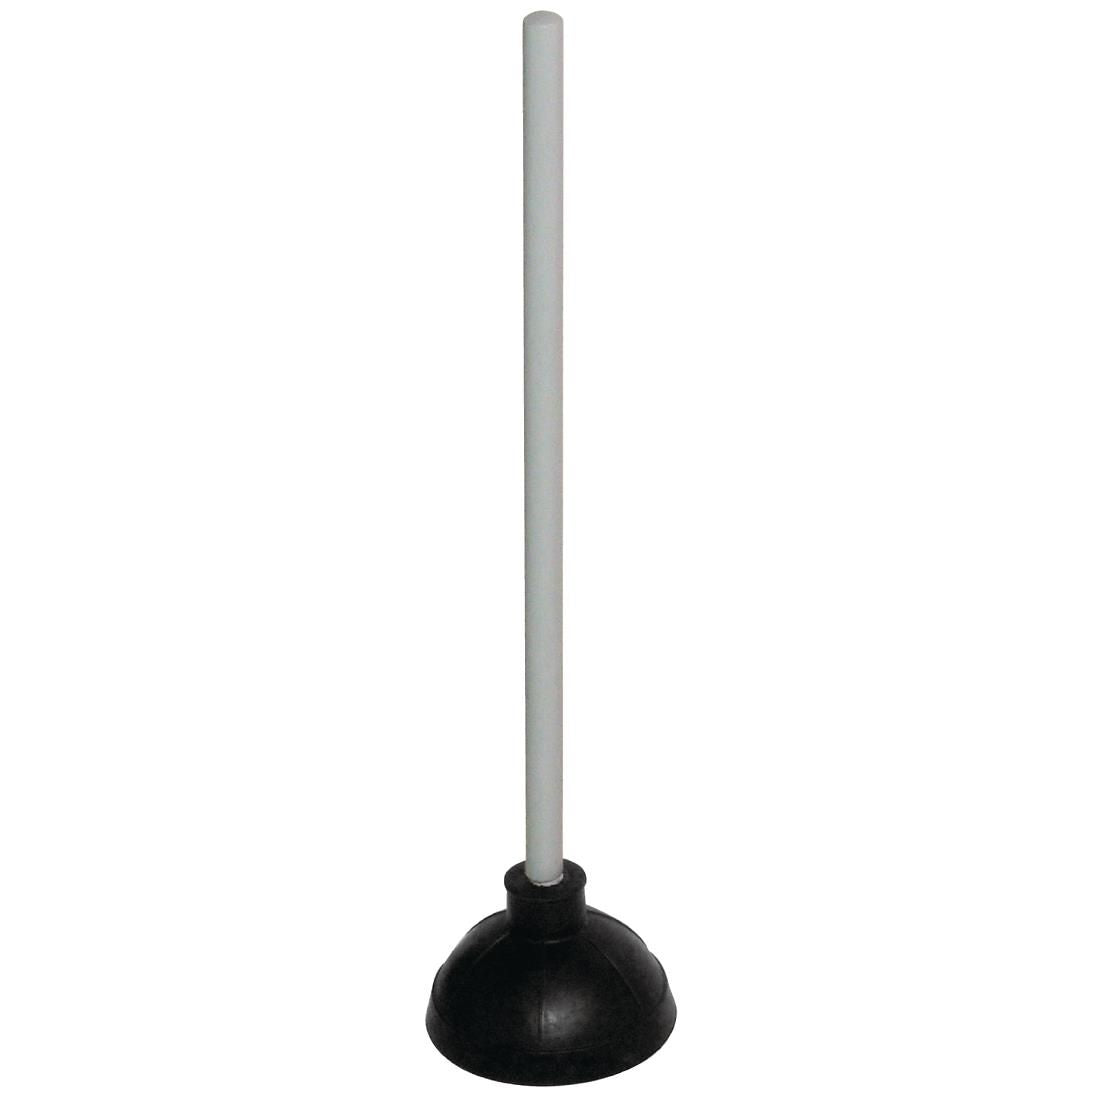 Jantex Plunger With Wooden Handle JD Catering Equipment Solutions Ltd